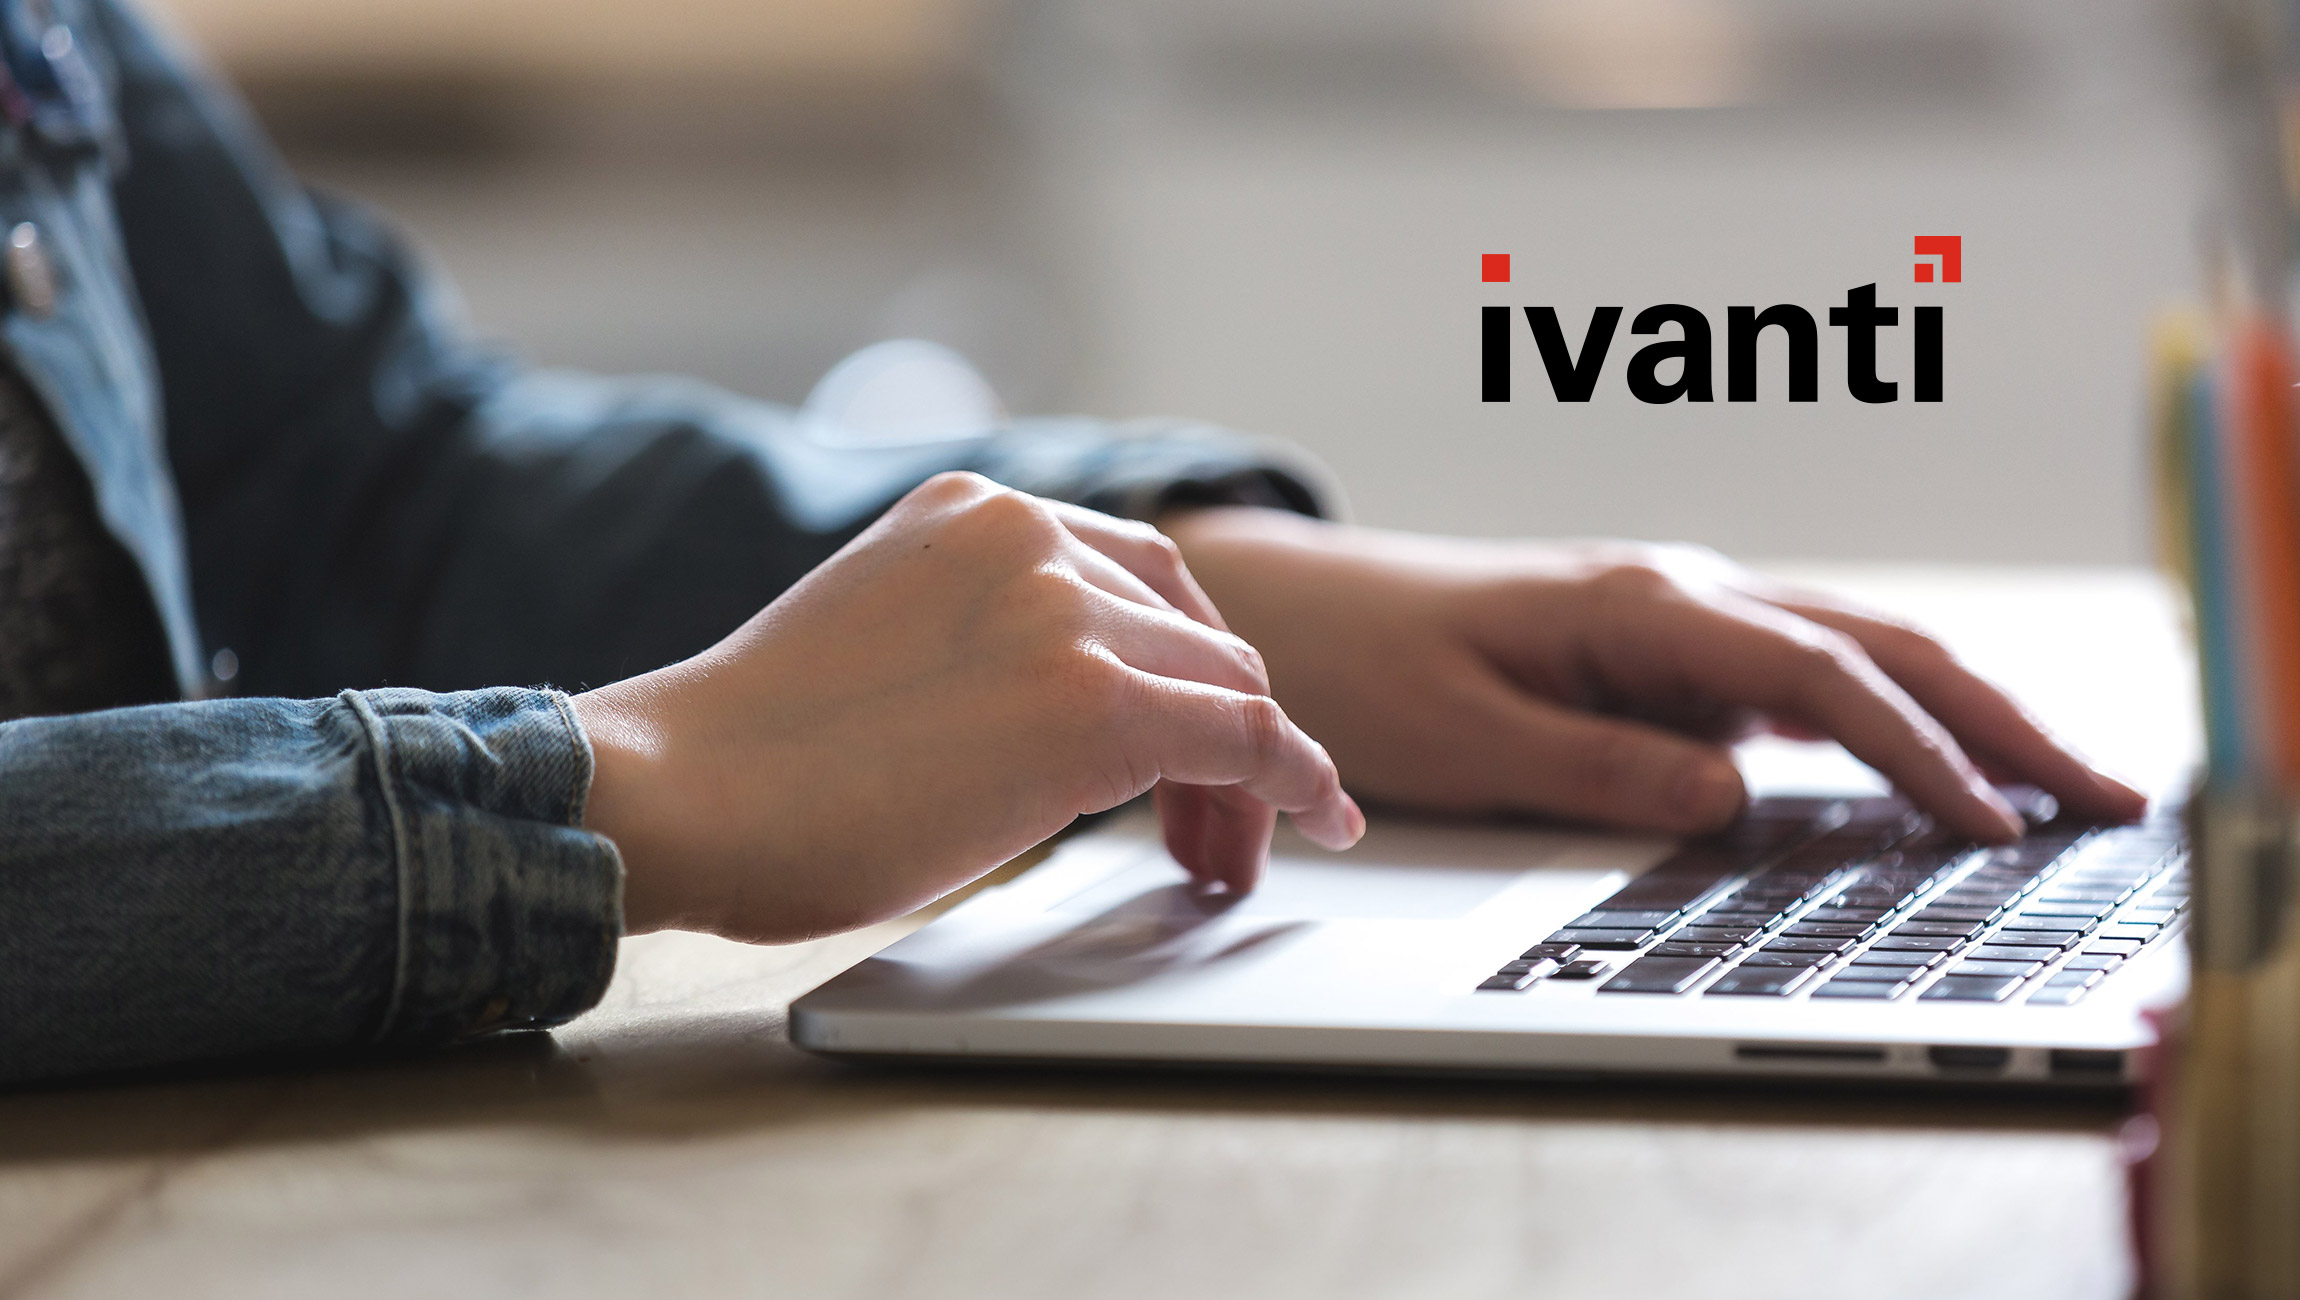 Ivanti Expands Management for Endpoints and Workspaces to Simplify IT Processes and Deliver a More Ambient User Experience